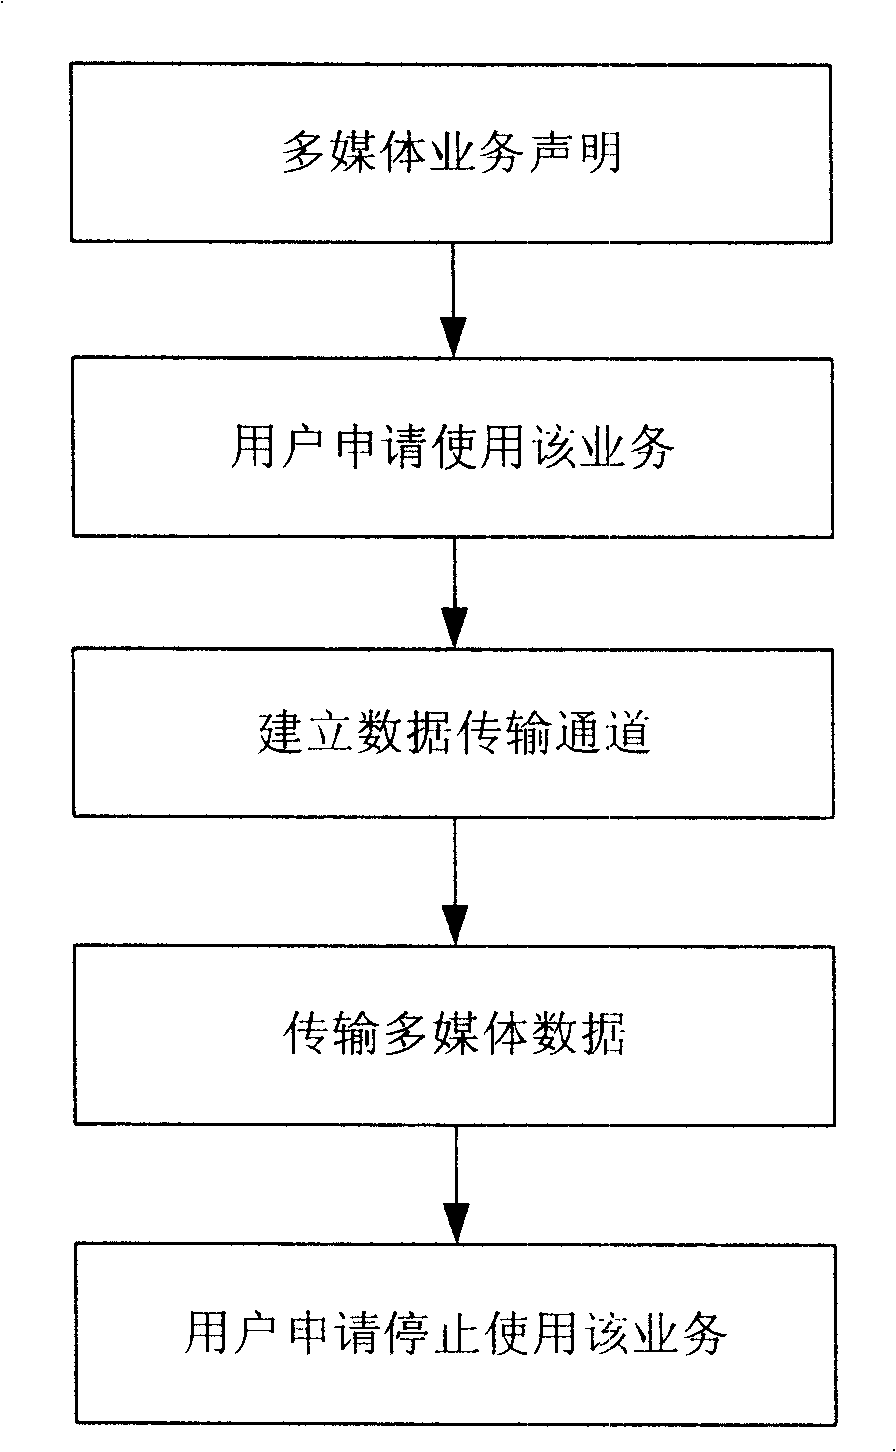 Method for implementing multimedia multicast service of mobile communications network